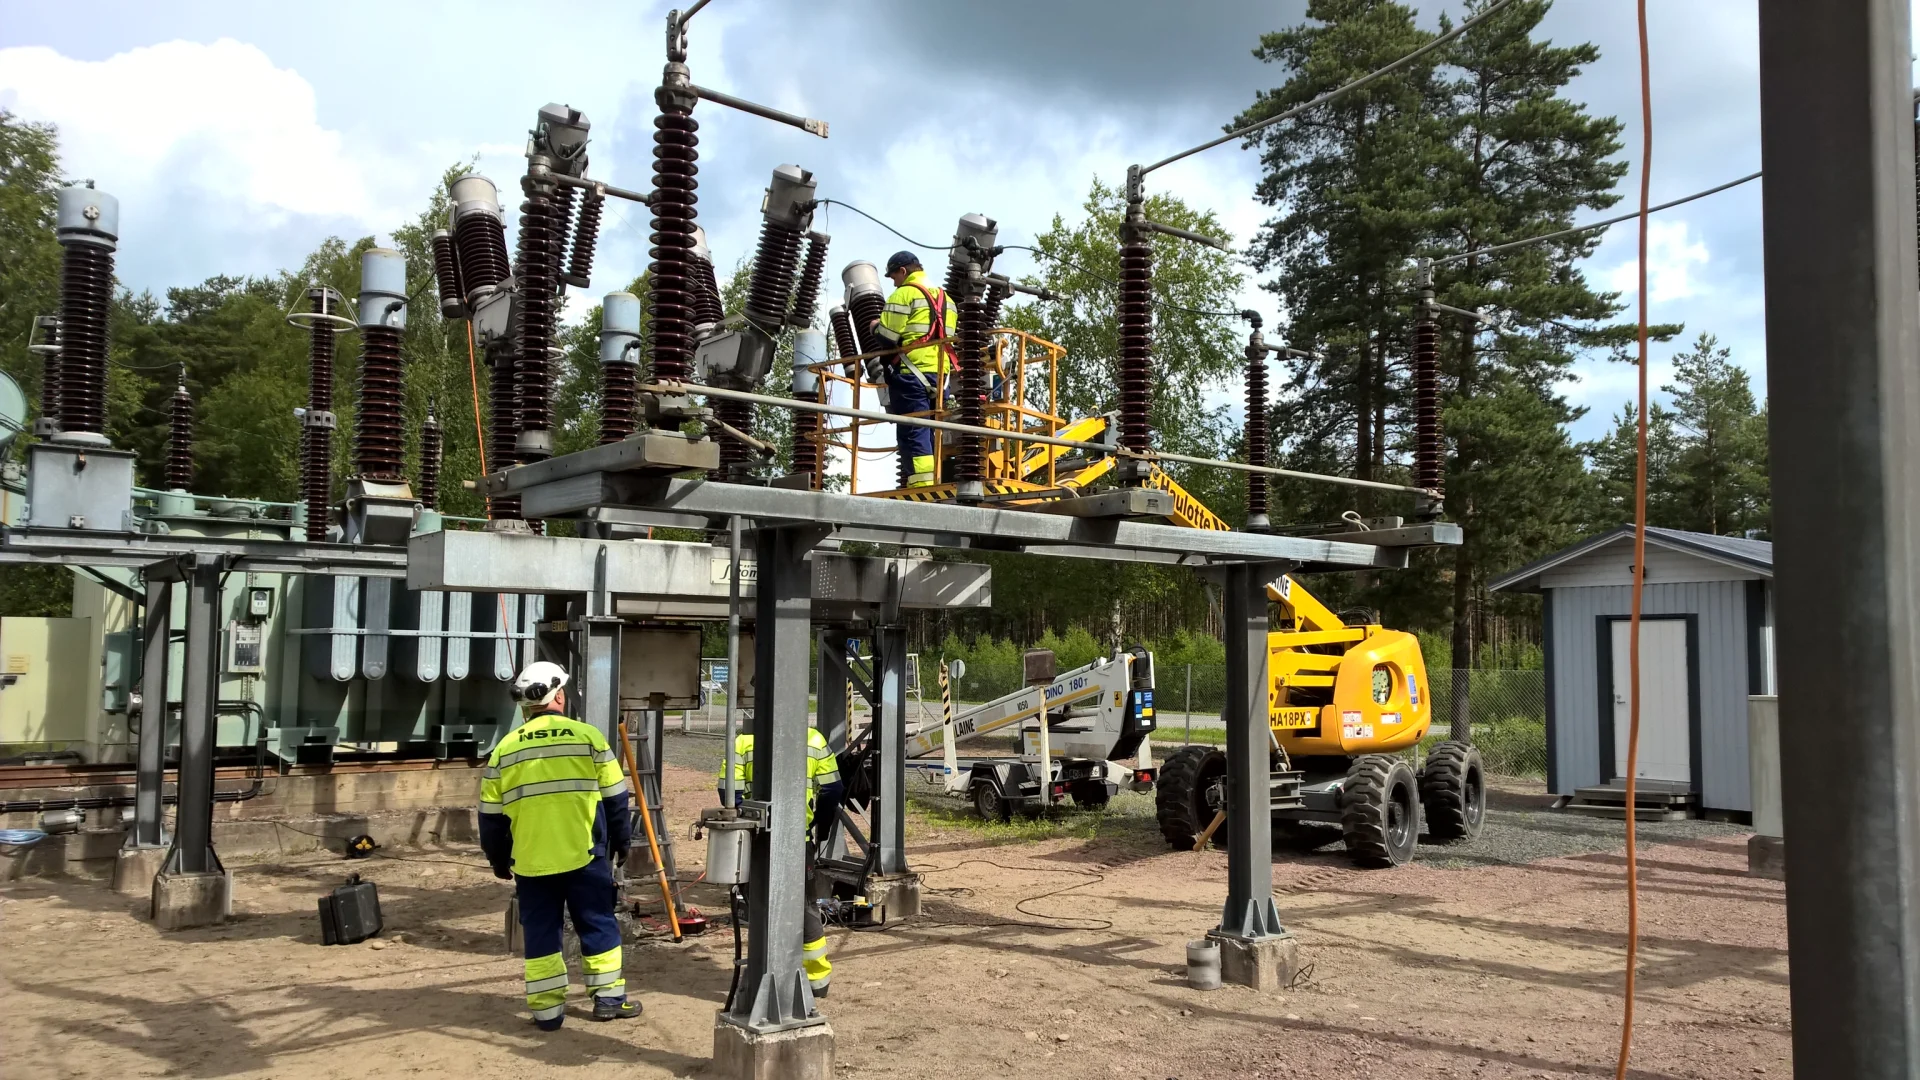 Employees of the Insta Electricity Distribution Unit working at a transformer.